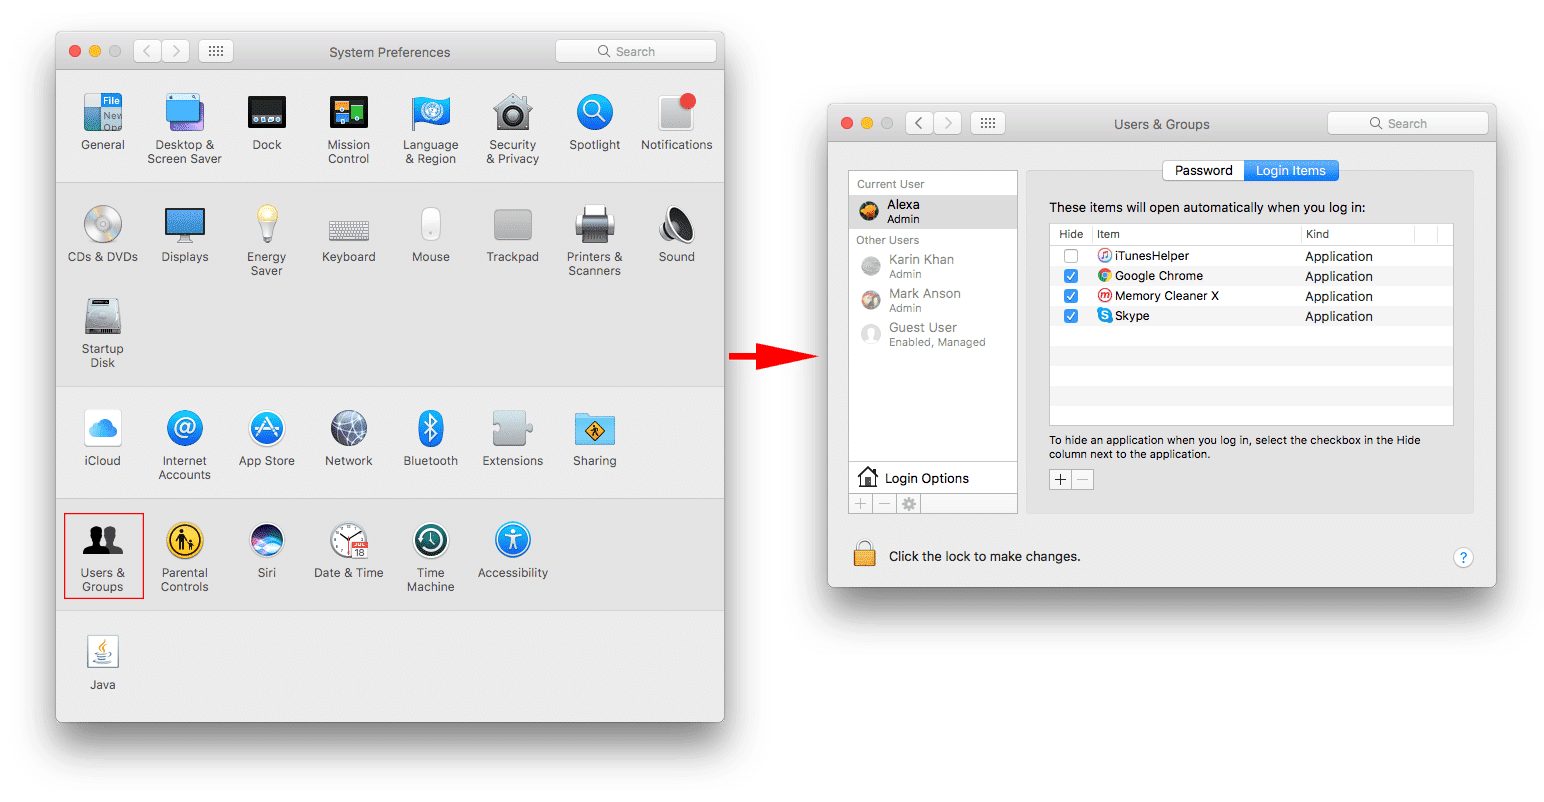 Login items tab in User & Groups section of System preferences